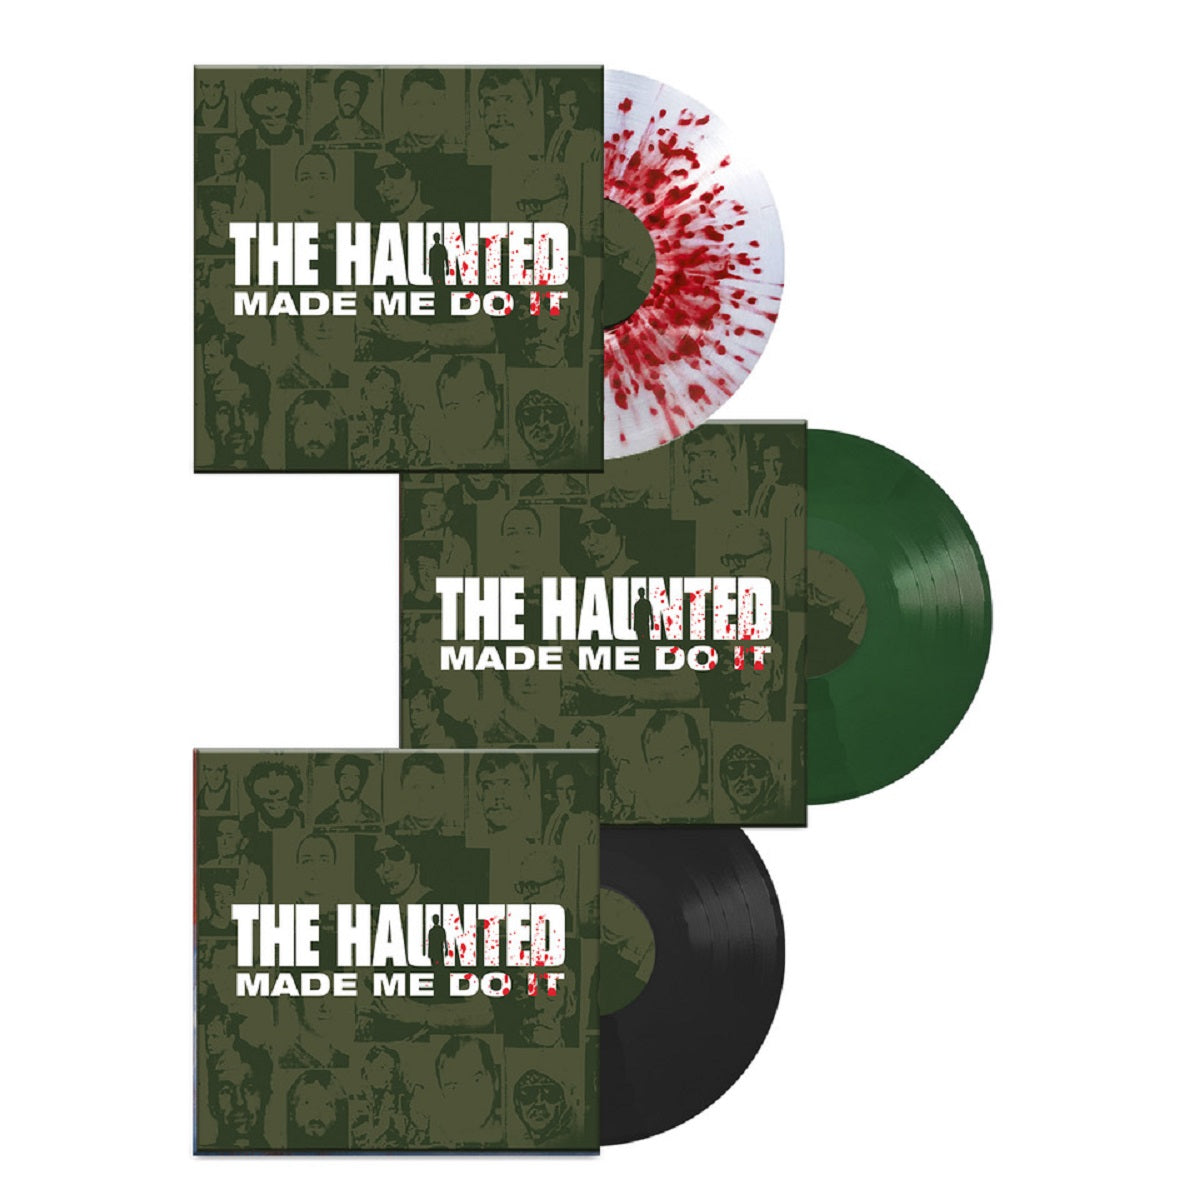 The Haunted "Made Me Do It" Black Vinyl